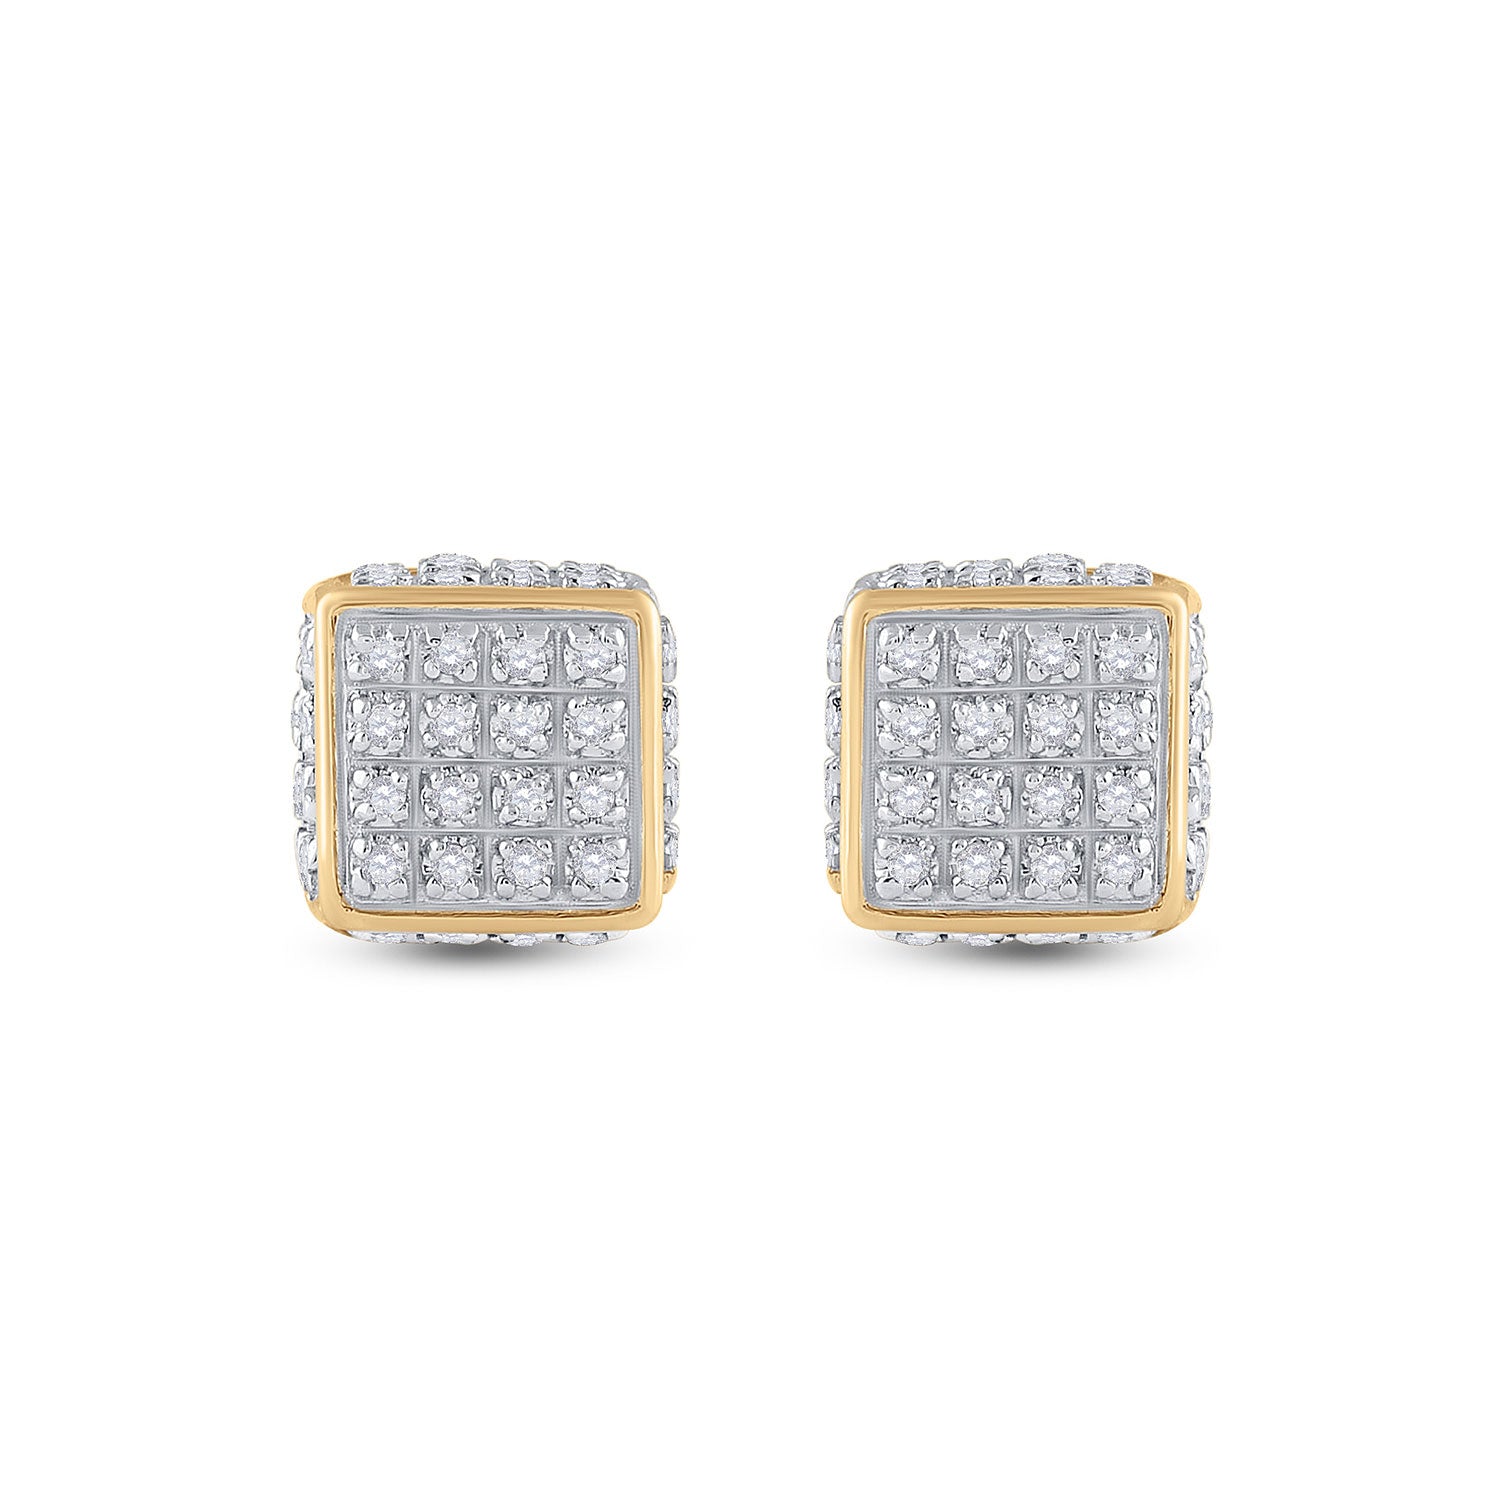 Square 10 Cubic Zirconia Earrings 14K Gold Filled Silver Hip Hop Studs – JB  Jewelry BLVD